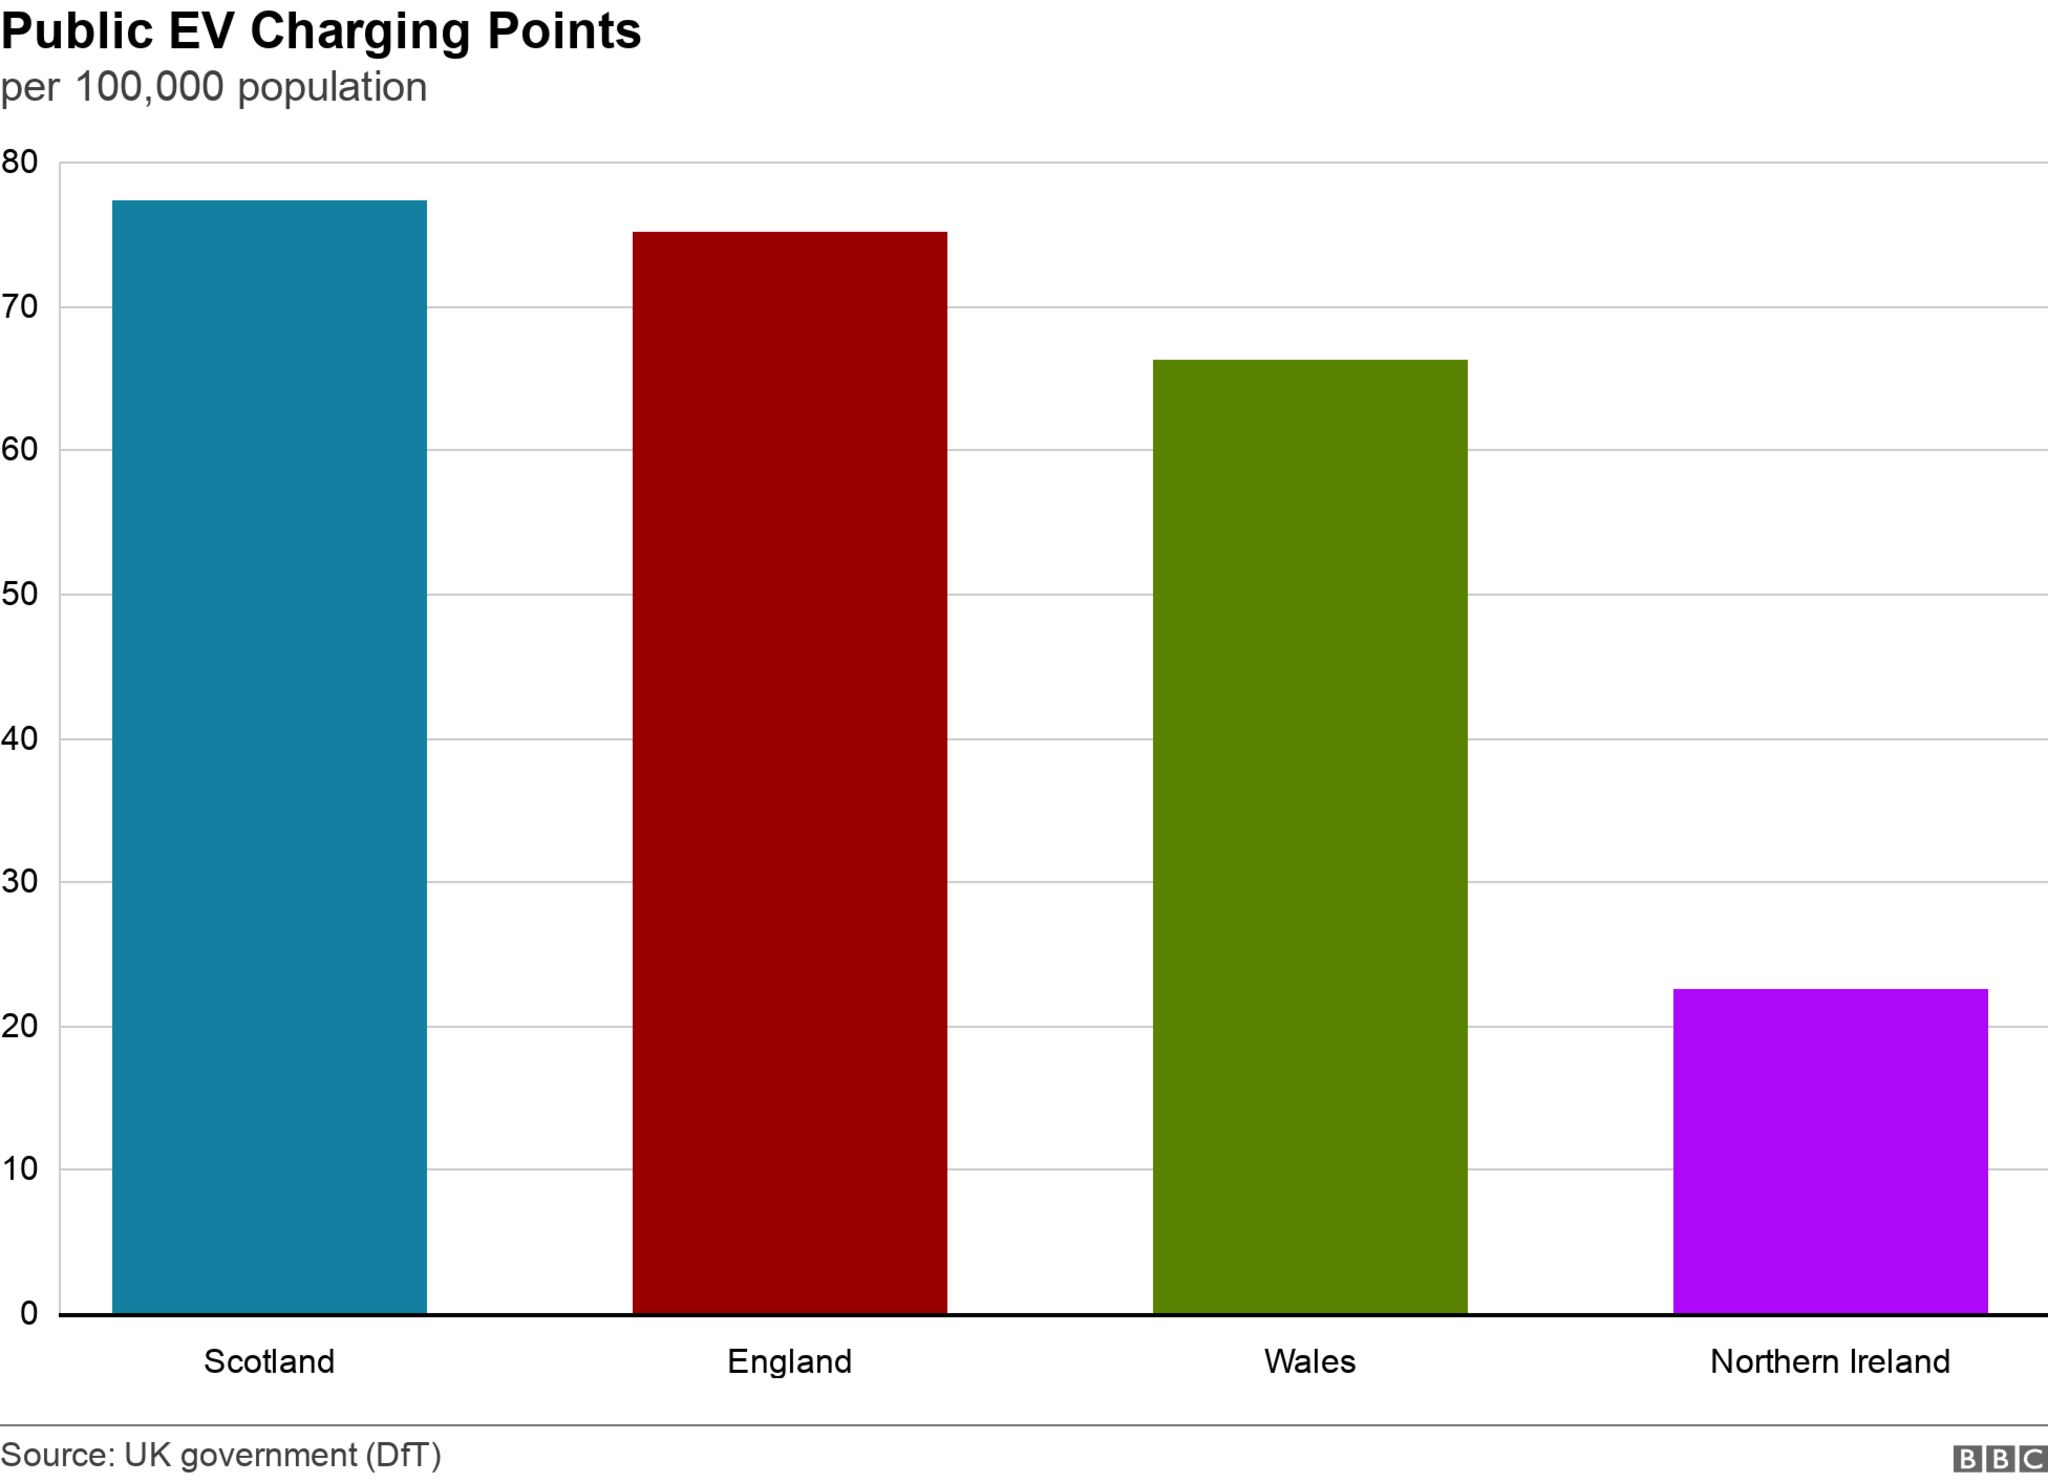 Column chart showing EV public charge points per 100,000 population: Scotland 78, England 75, Wales 66, Northern Ireland 22